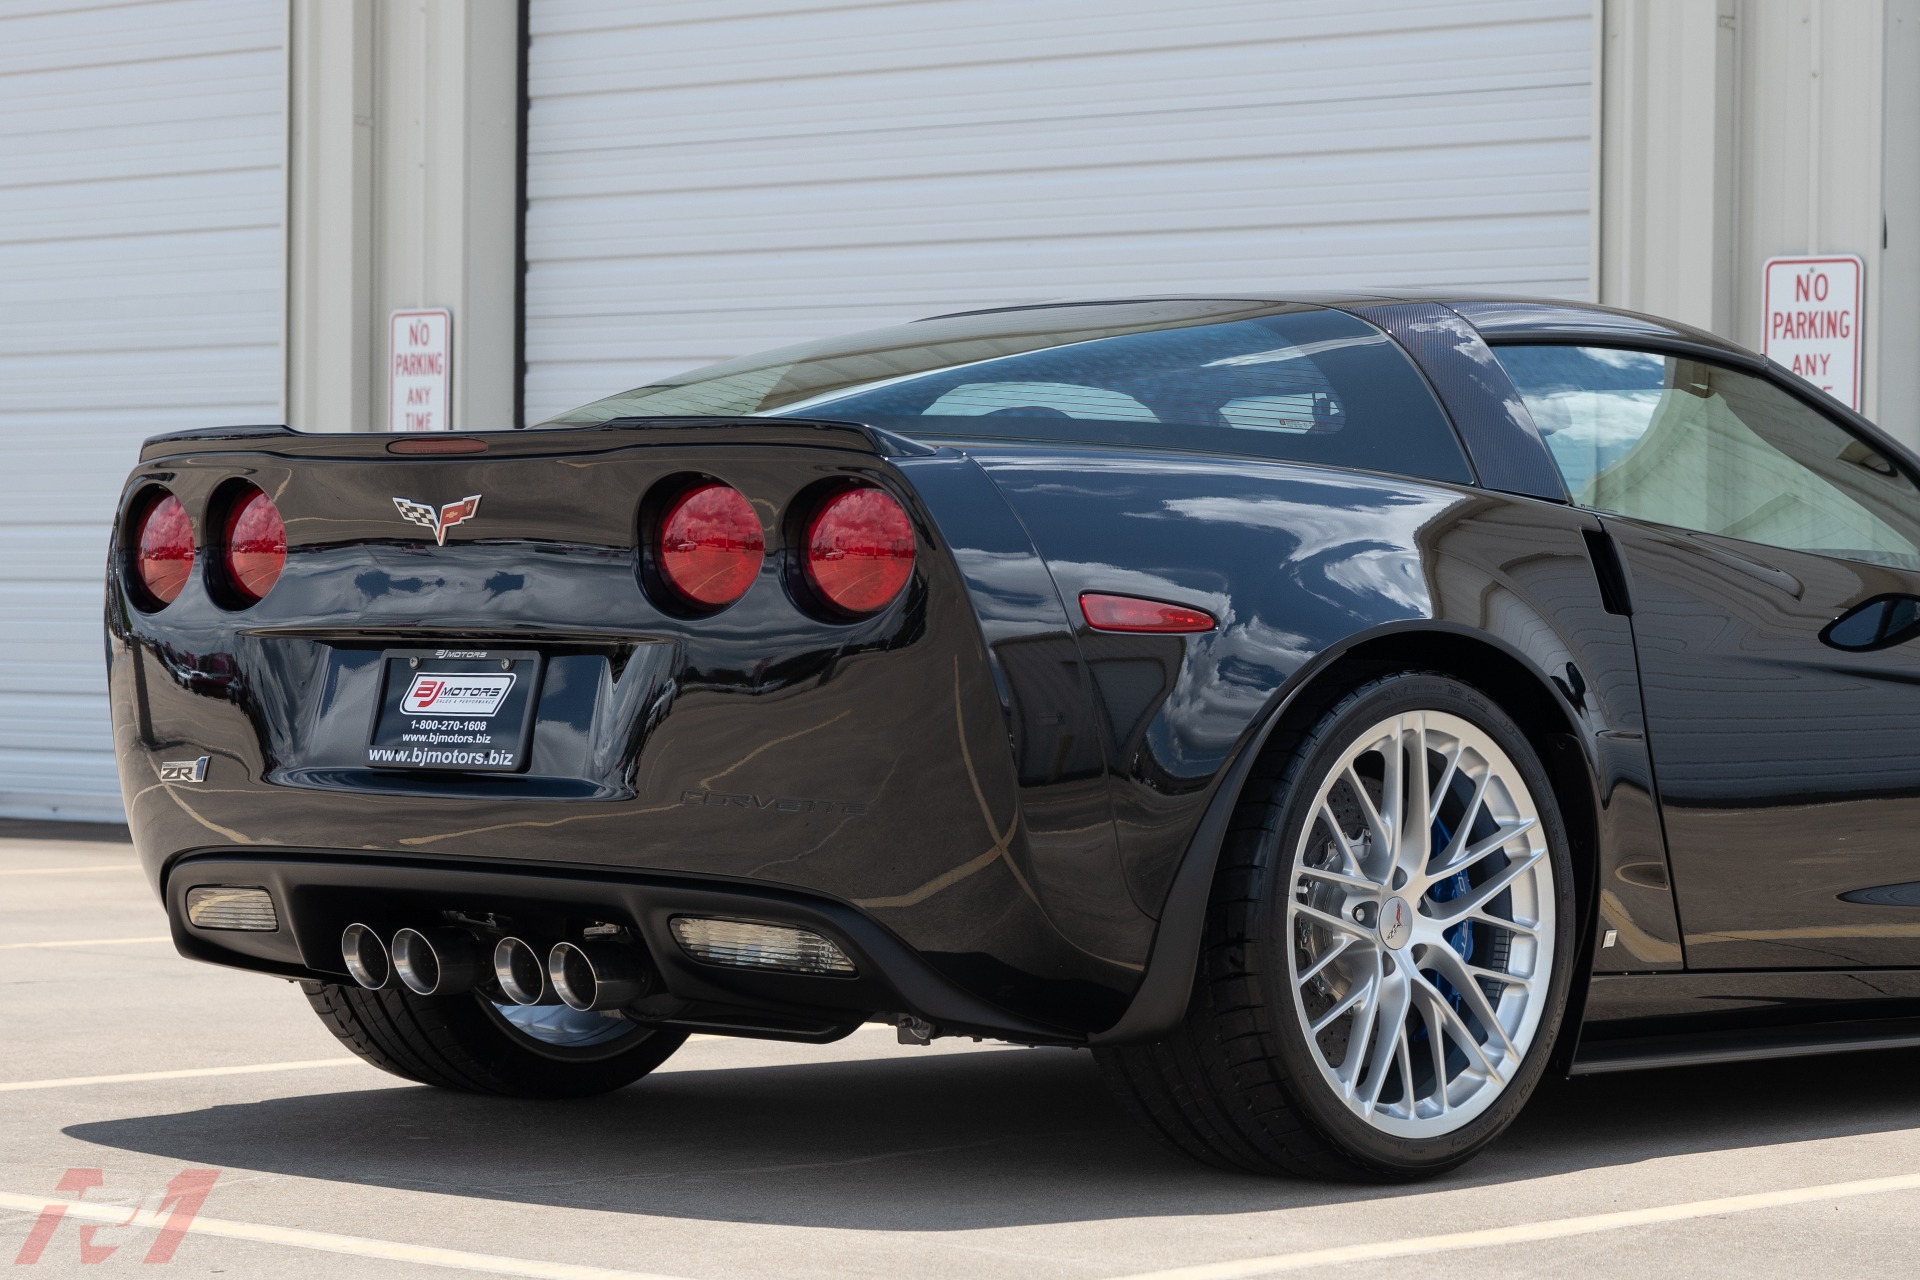 Used 2009 Chevrolet Corvette ZR1 3ZR For Sale (Special Pricing) | BJ ...